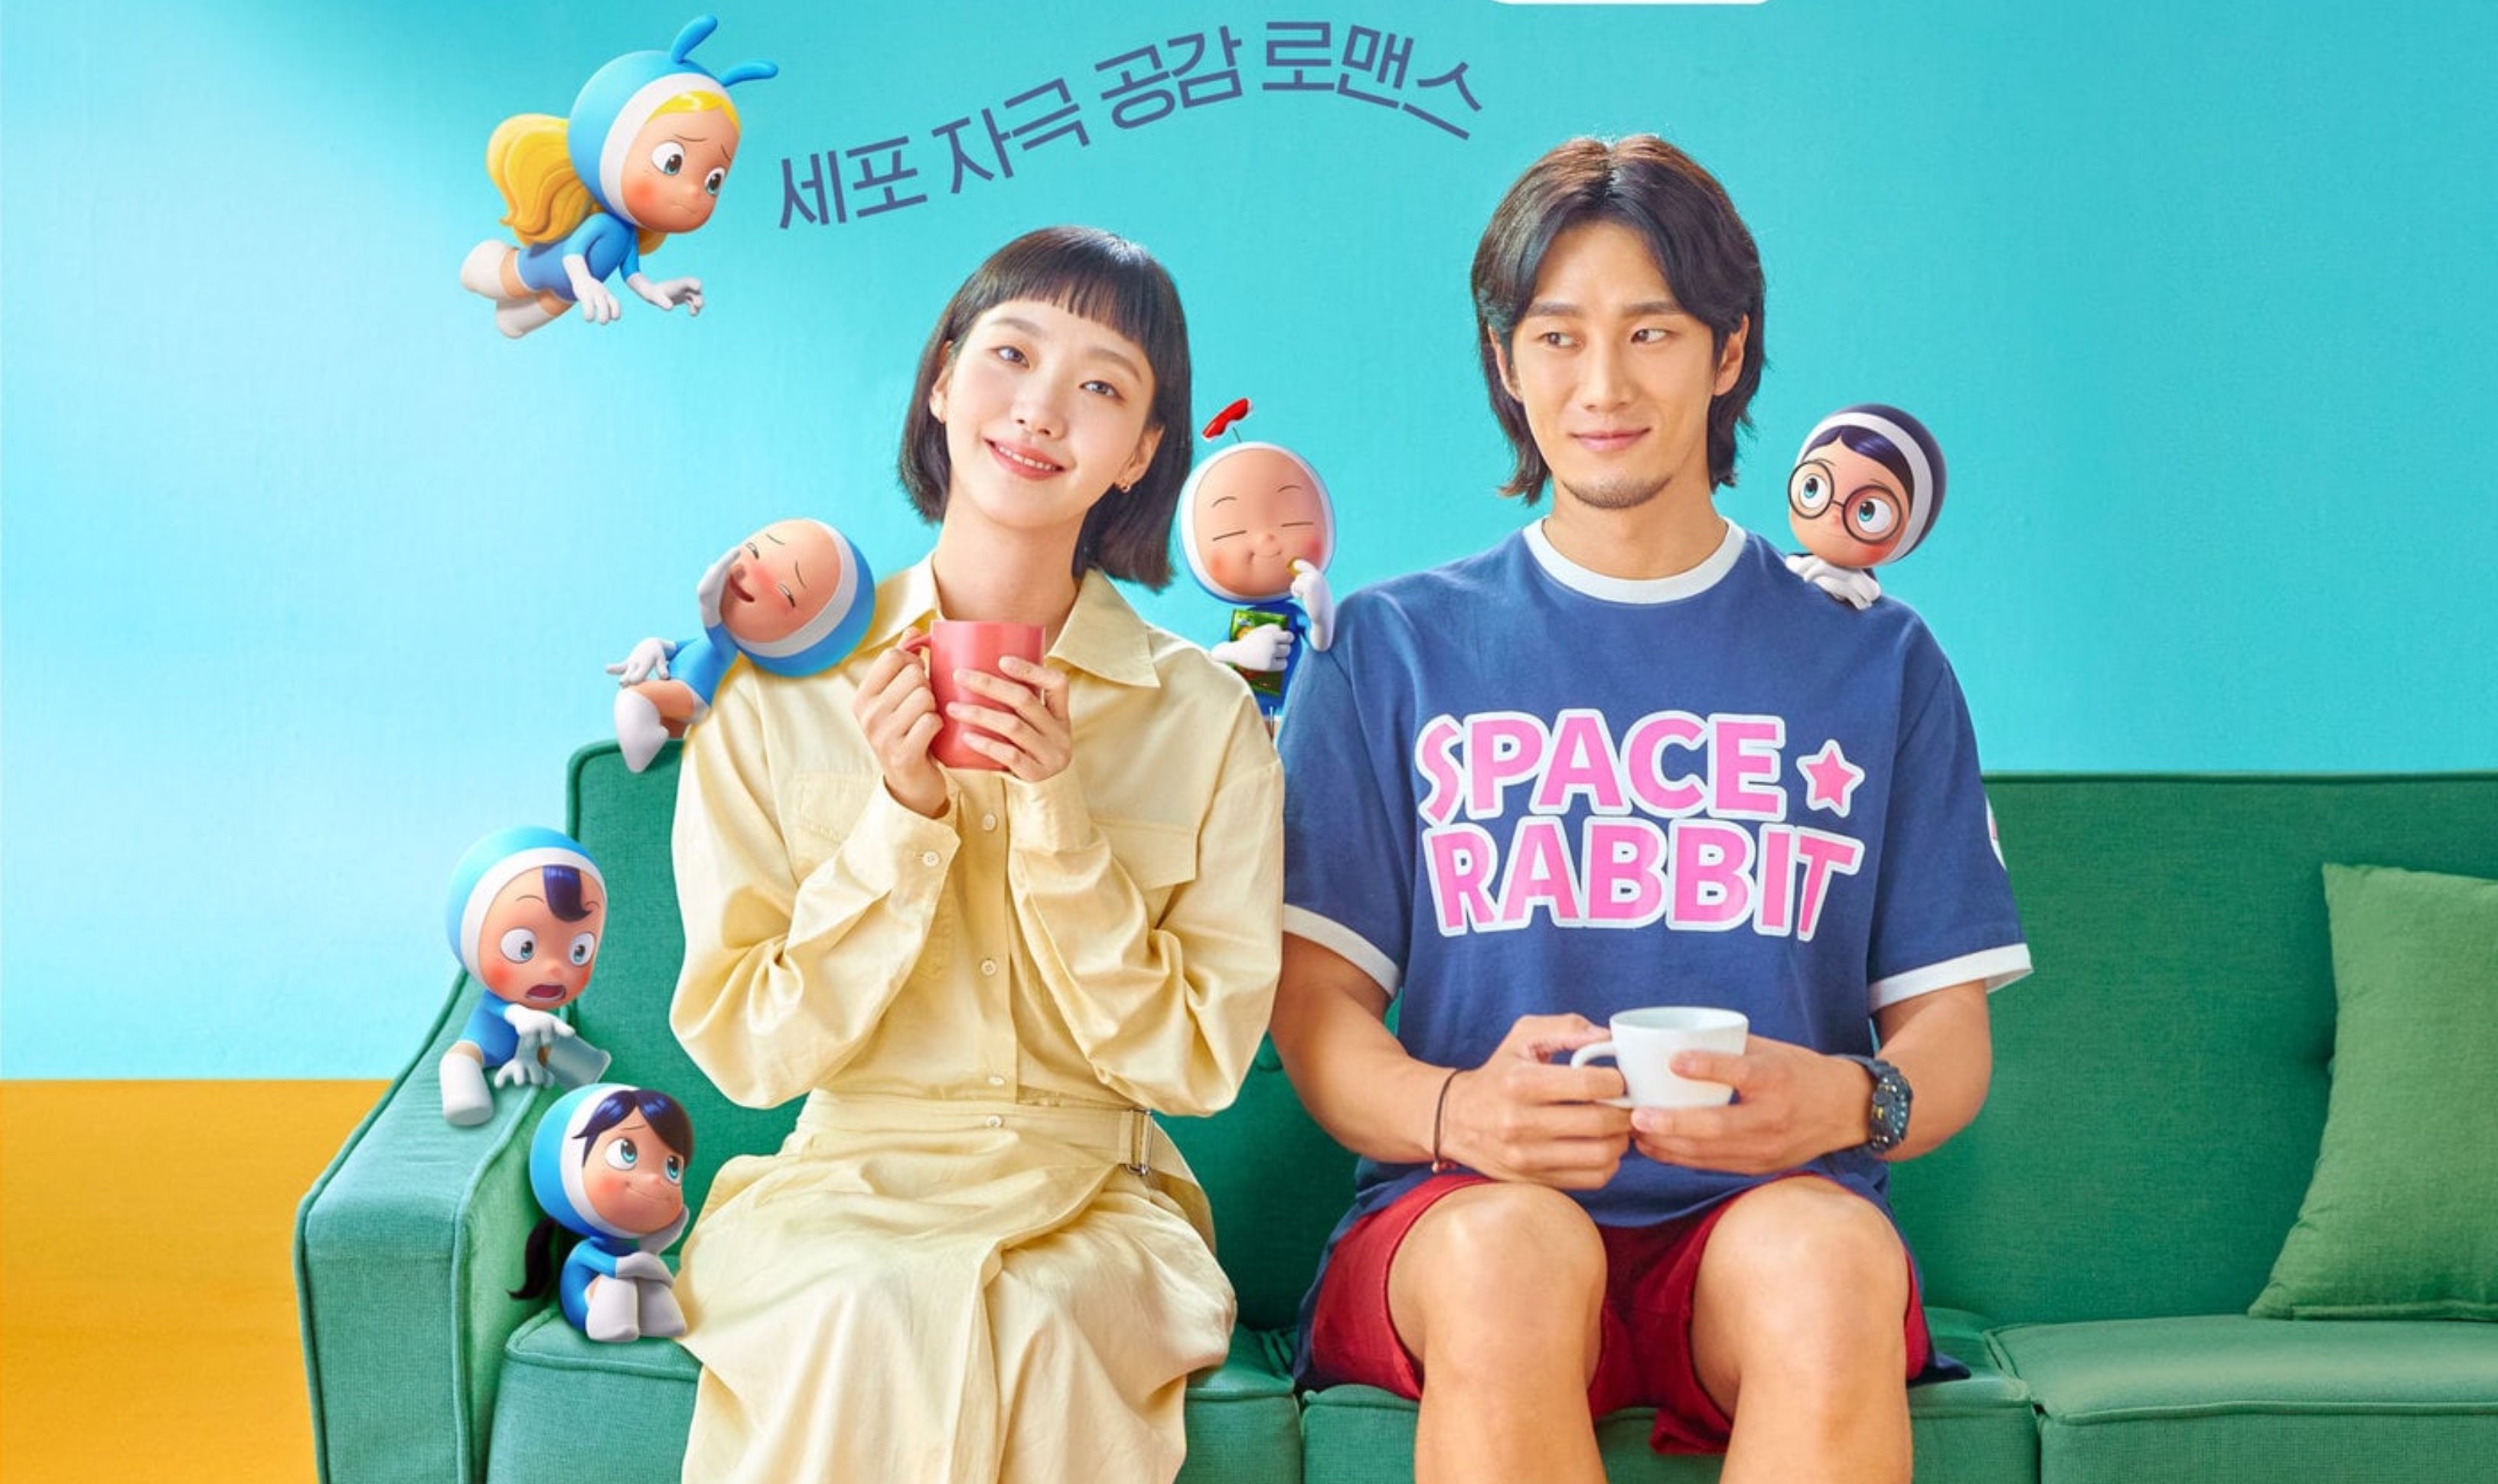 Kim Go-Eun and Ahn Bo-Hyun 'Yumi's Cells' sitting on the couch with animated characters